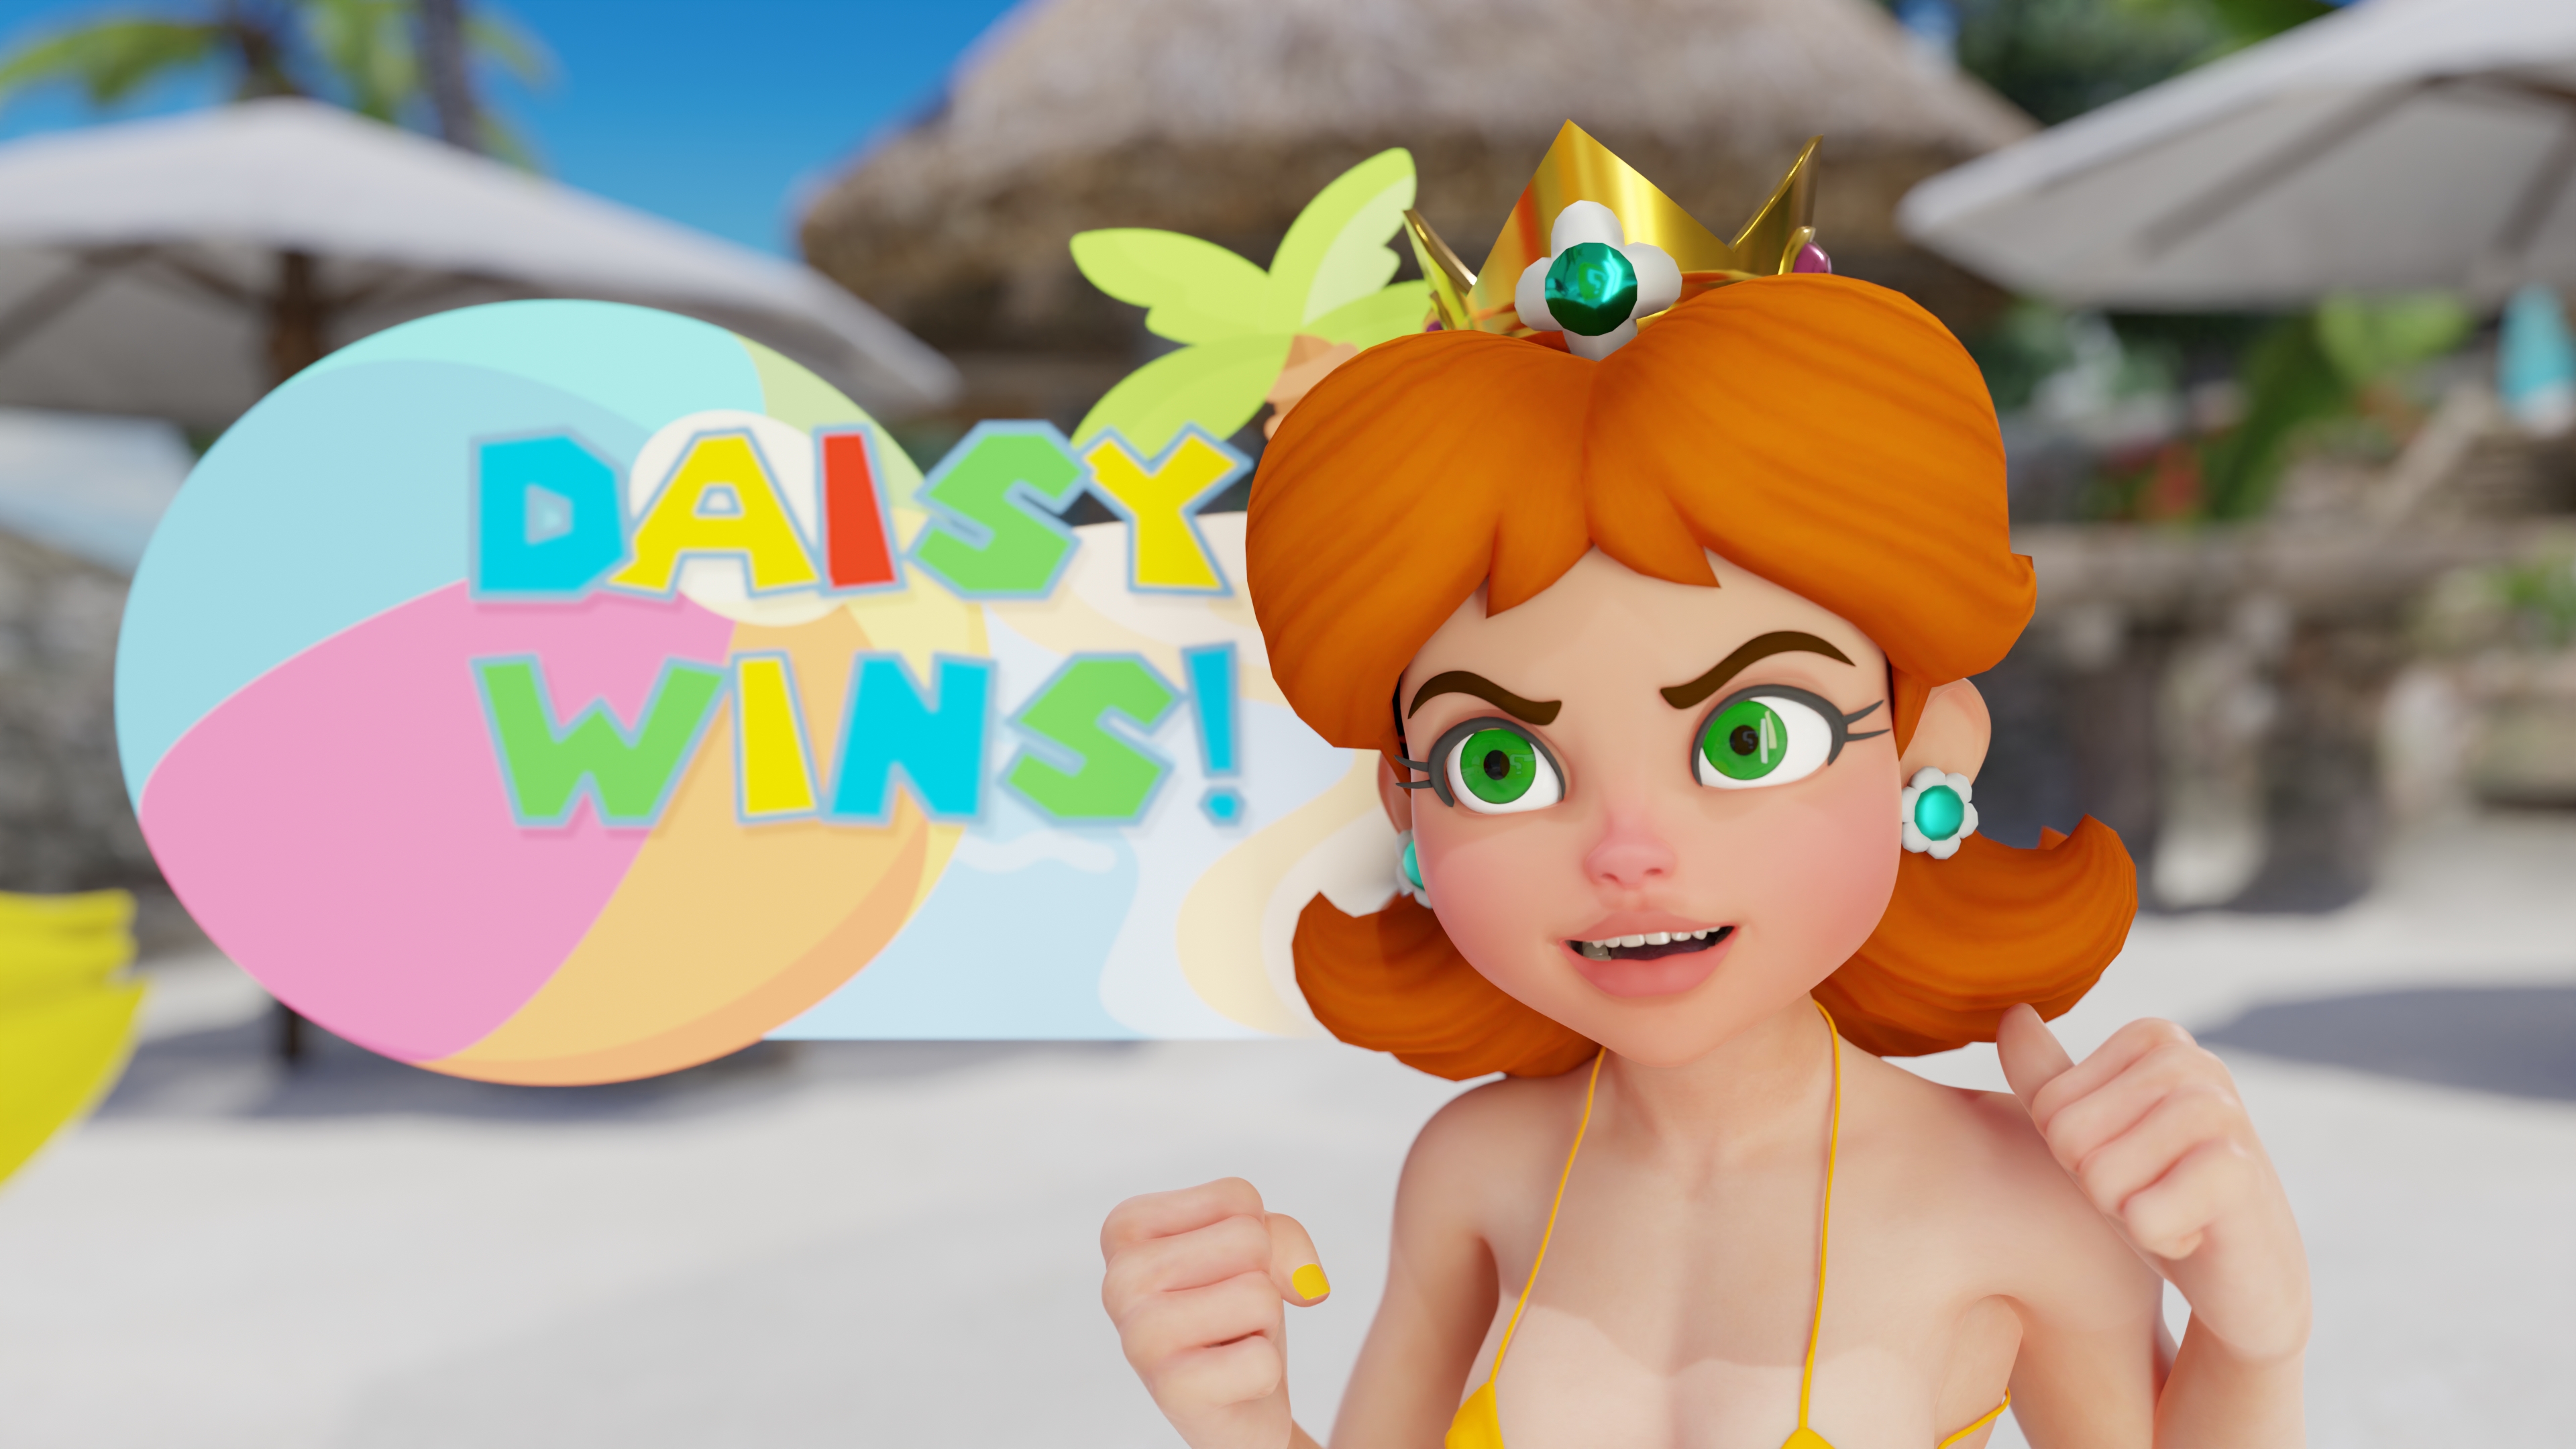 Peach and Daisy Pooltoy challenge! Princess Peach Princess Daisy Super Mario Inflation Fetish Body Inflation Animated Fat Bbw Belly Big Butt Balloon Rubber Hourglass Pose Mouth Taped 3